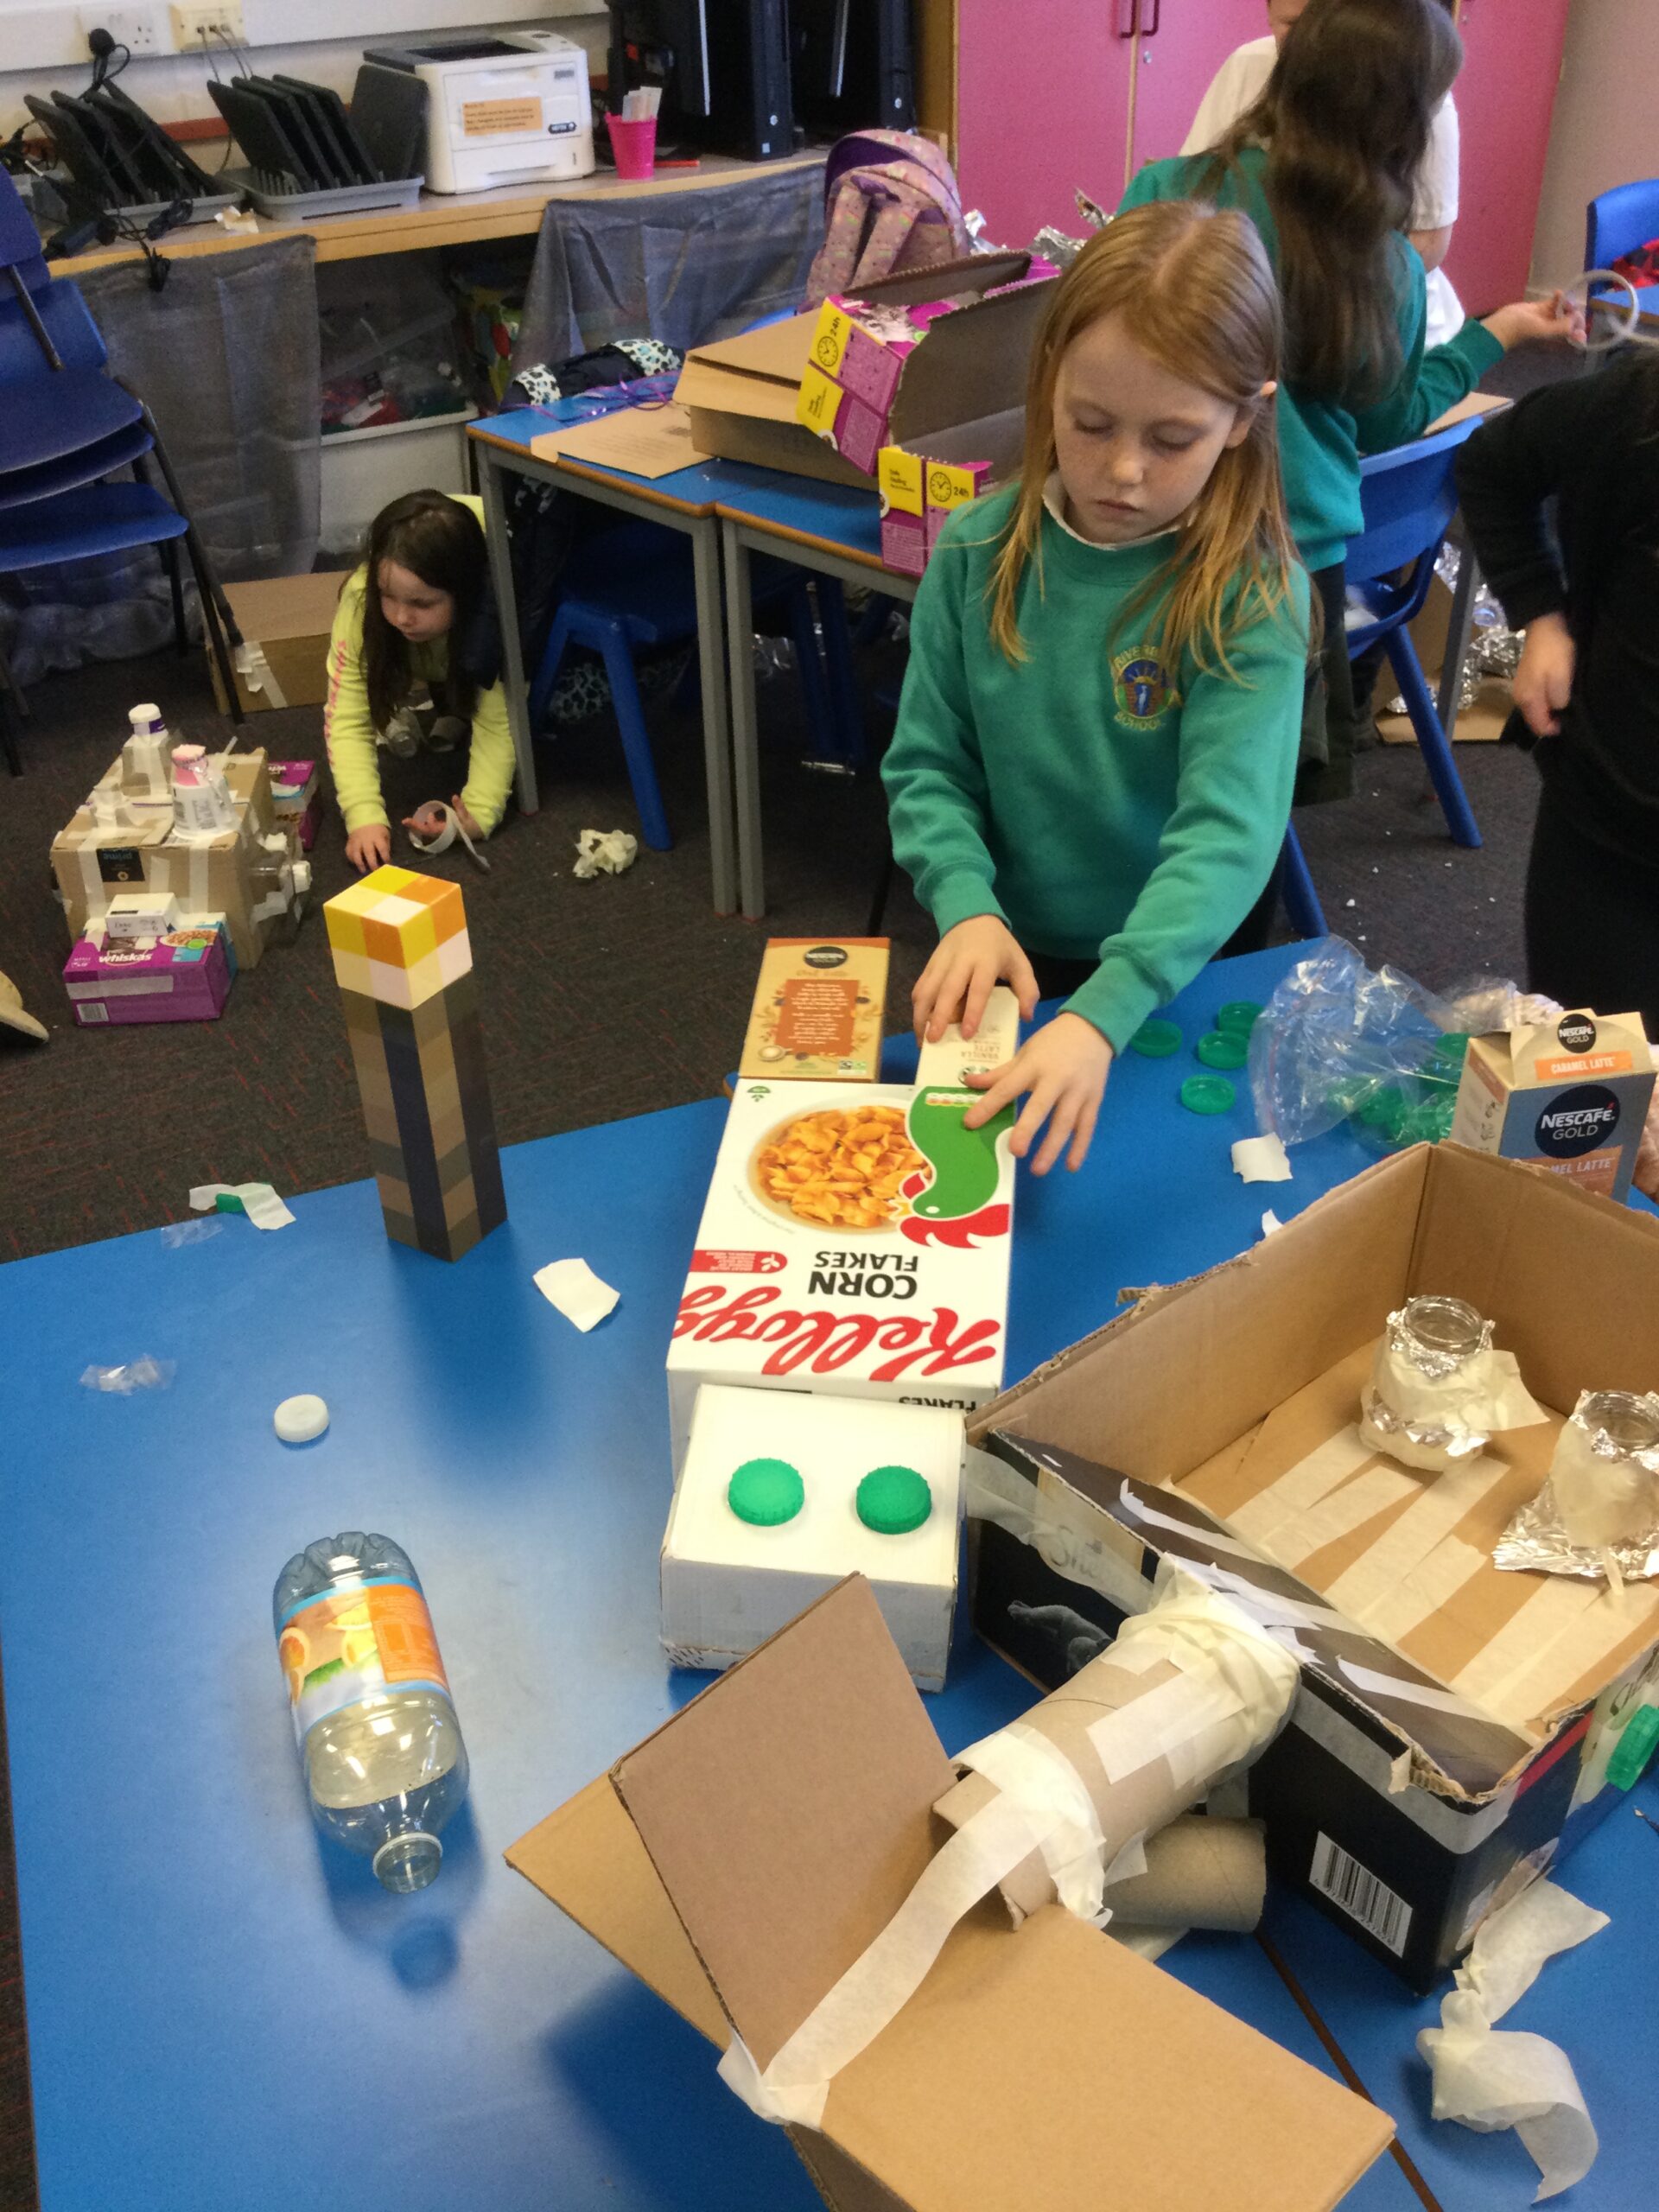 Riverbank’s Inventors:                                 P3-4M highlight their inventions of the future!